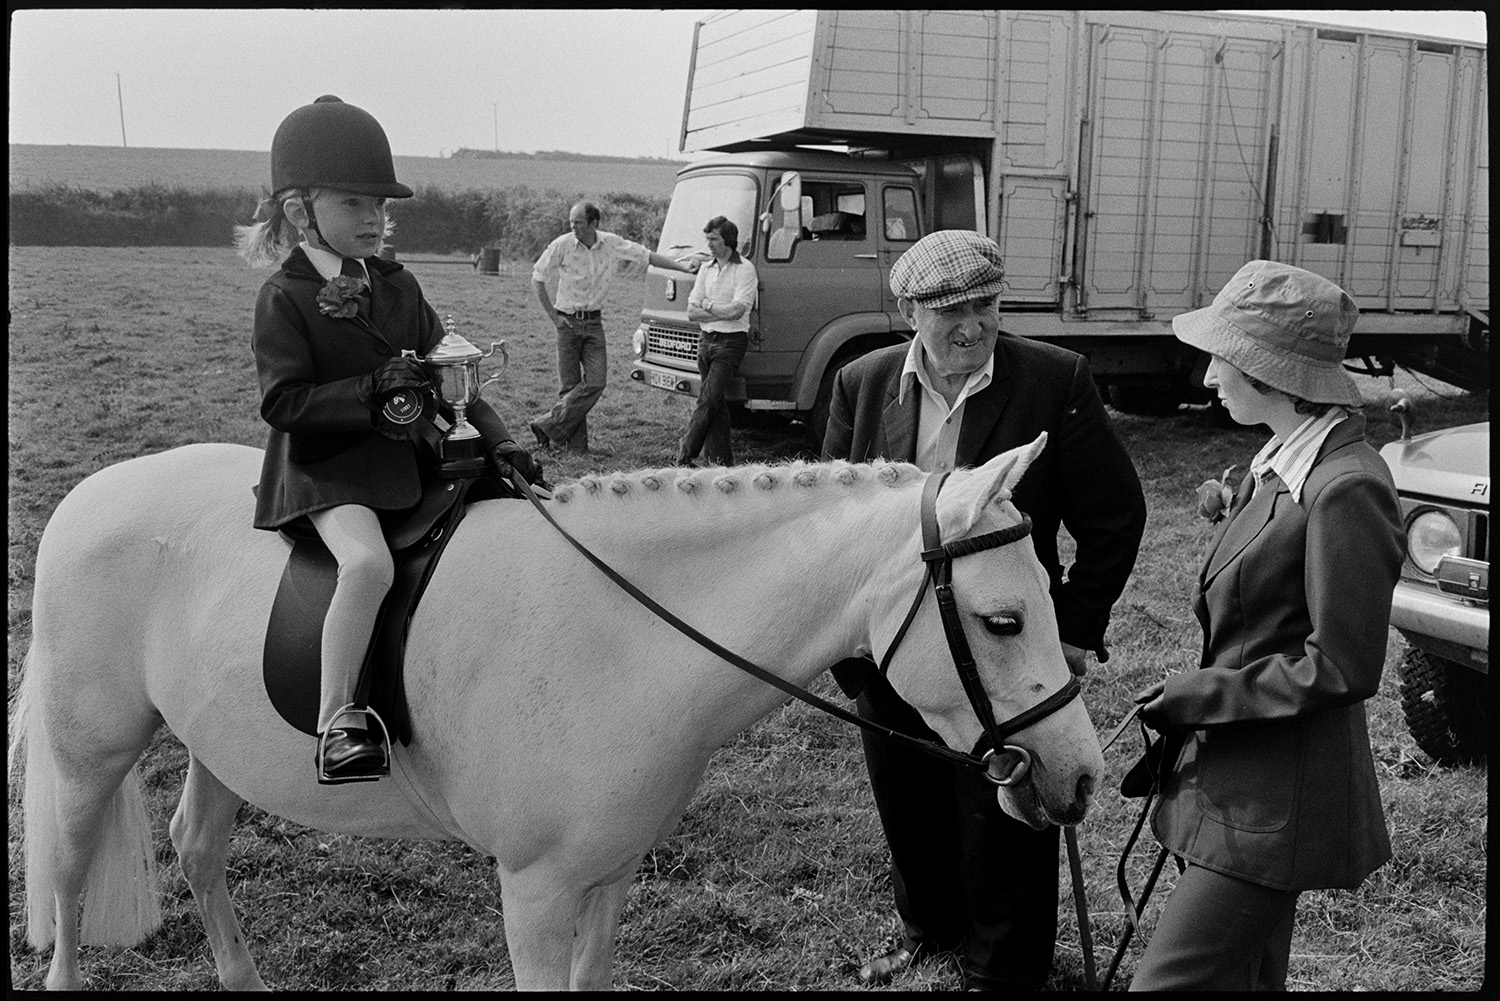 Competitors preparing gymkhana, horseboxes. 
[A young girl on a horse with a plaited mane at Beaford Gymkhana. She is holding a cup she has won. A woman is holding the reins of the horse while talking to a man. Two people are leaning against a horsebox or animal transporter in the background.]